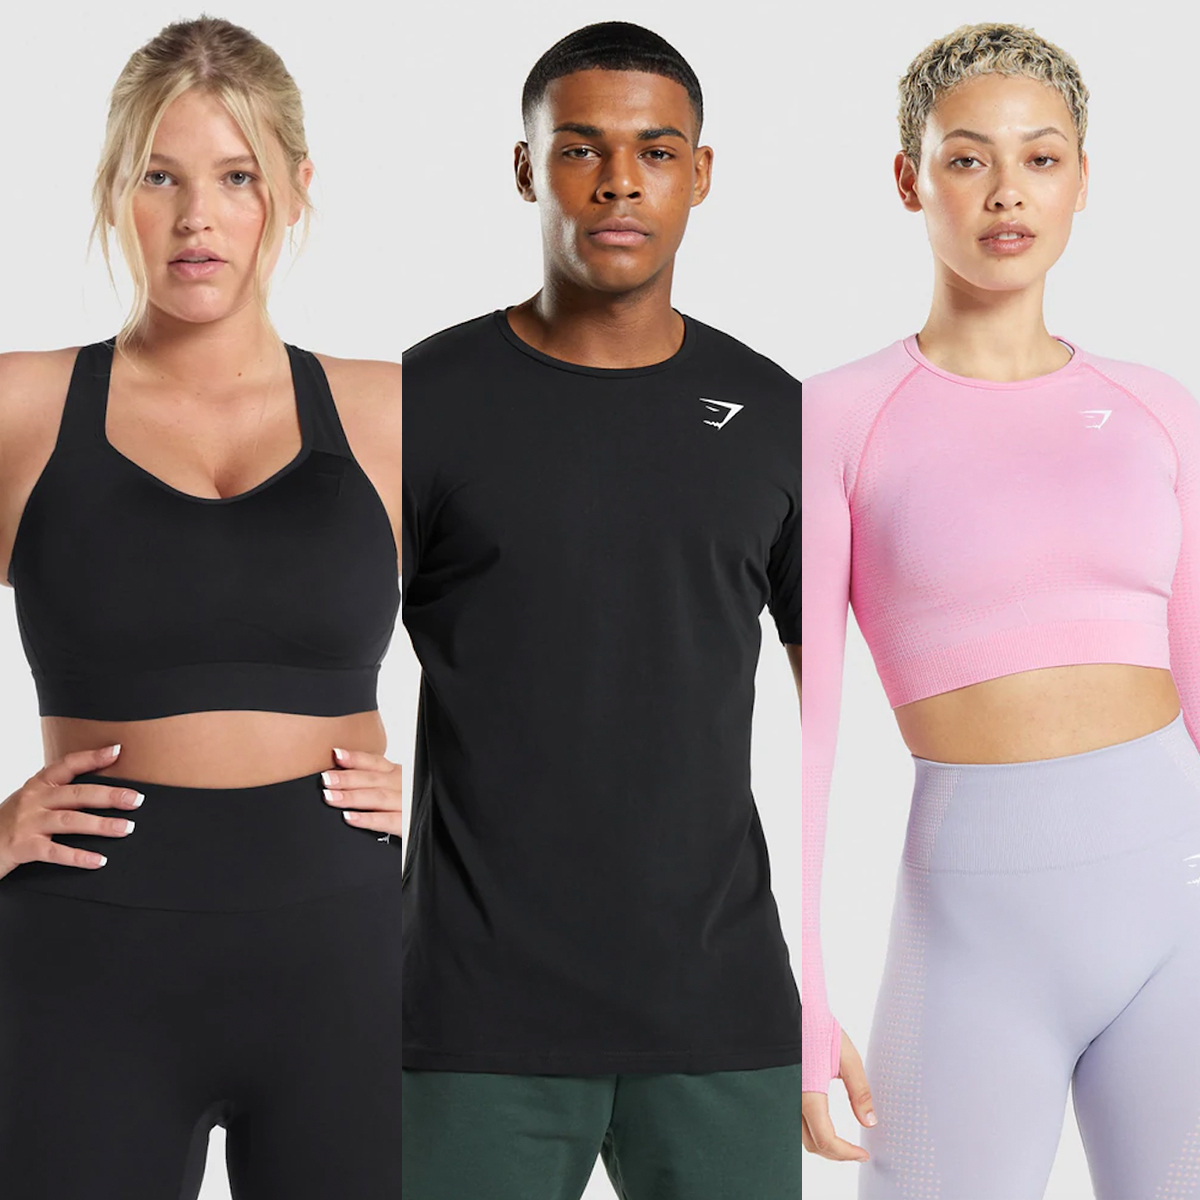 Gymshark announce huge midseason sale with up to 50% off - this is what  we're buying